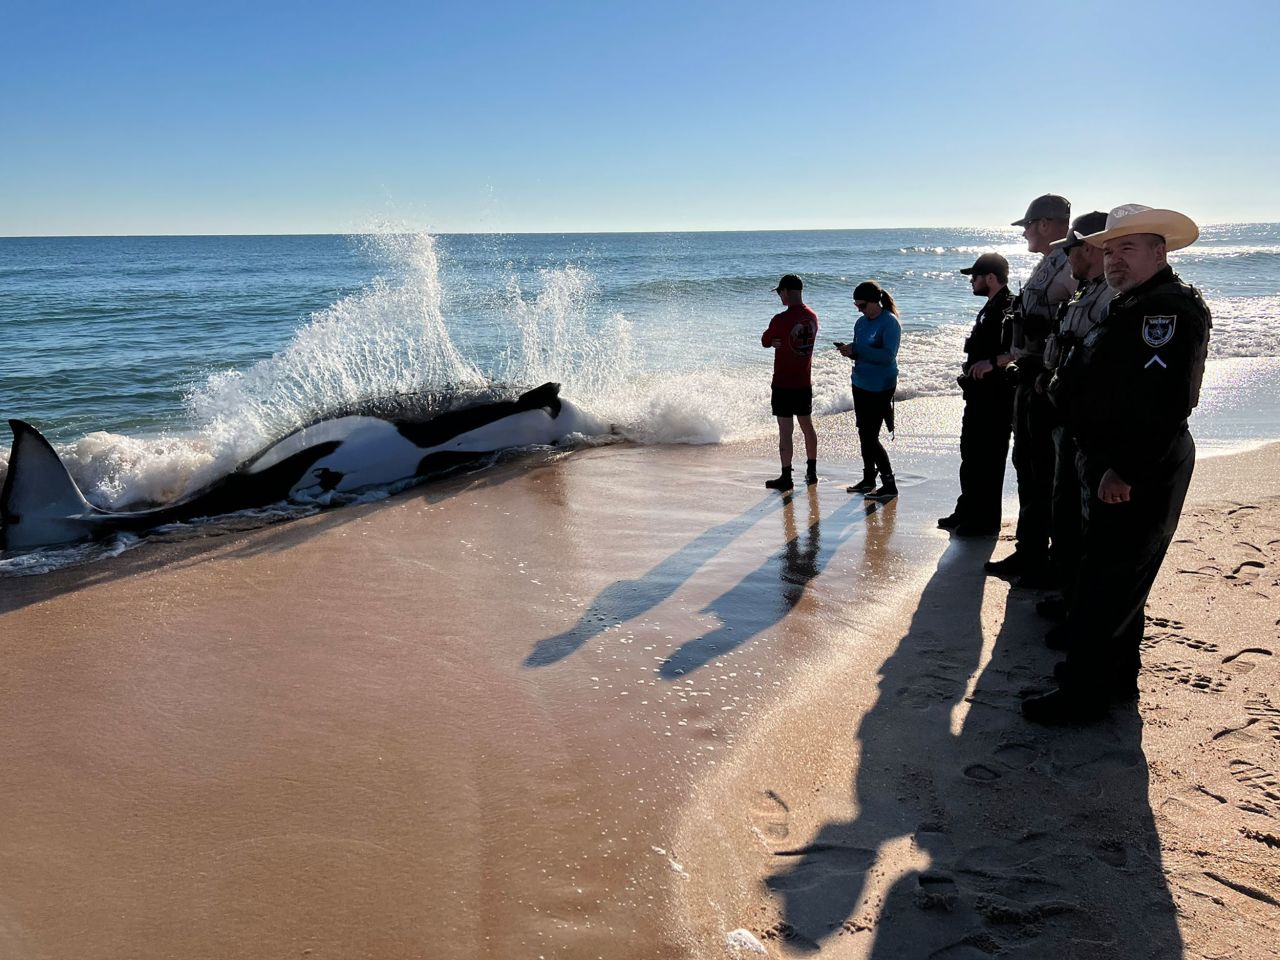 Wildlife officials investigate the <a href="https://www.cnn.com/2023/01/11/us/killer-whale-beaches-orca-florida/index.html" target="_blank">death of a female orca</a>, or killer whale, that grounded itself on a beach in Palm Coast, Florida, on Wednesday, January 11.